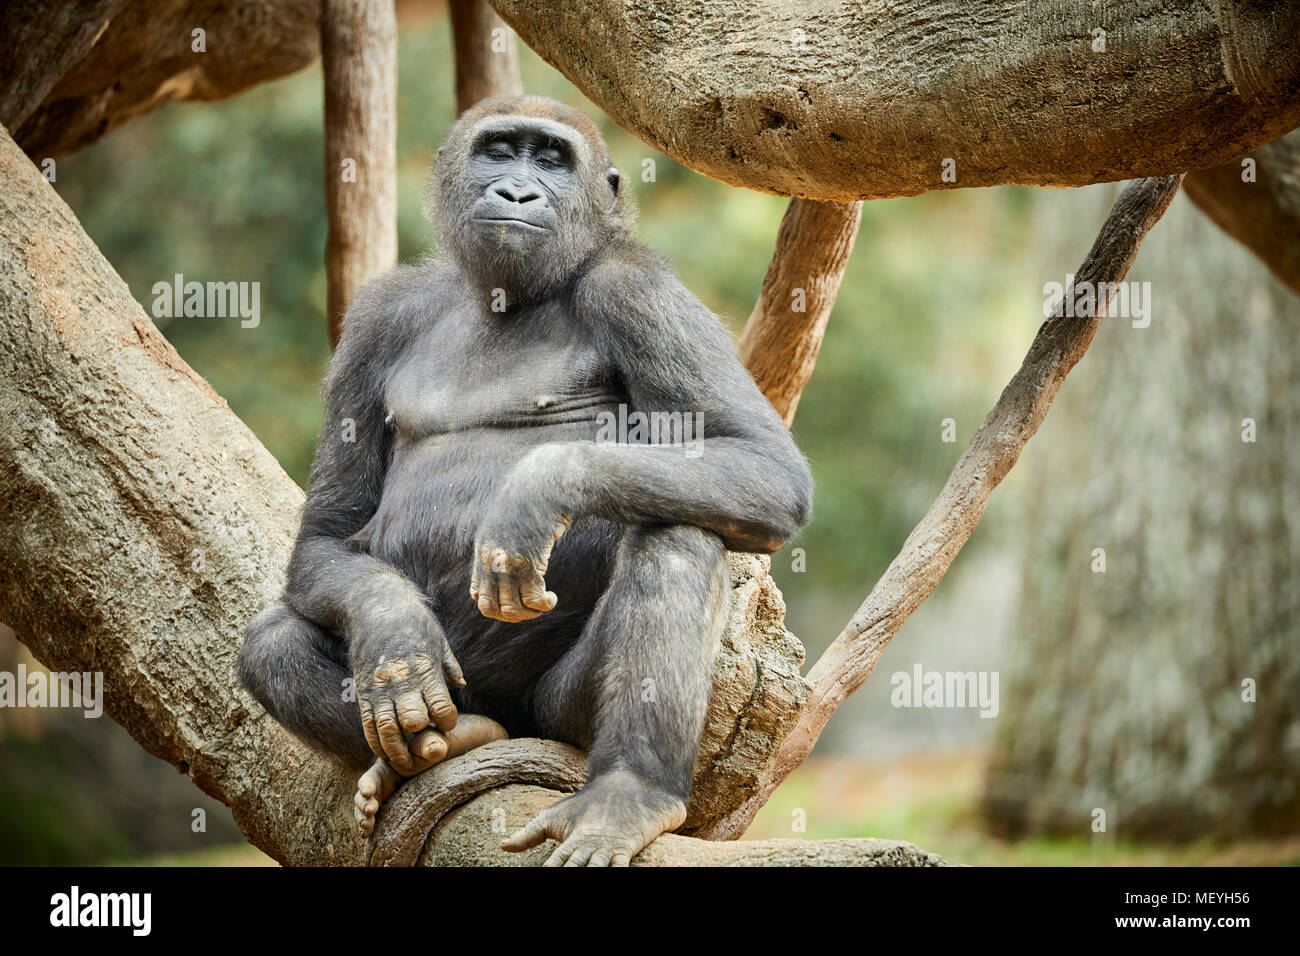 Atlanta capital of the U.S. state of Georgia,  Atlanta Zoo zoological park western lowland gorilla from lowland swamps in central Africa Stock Photo